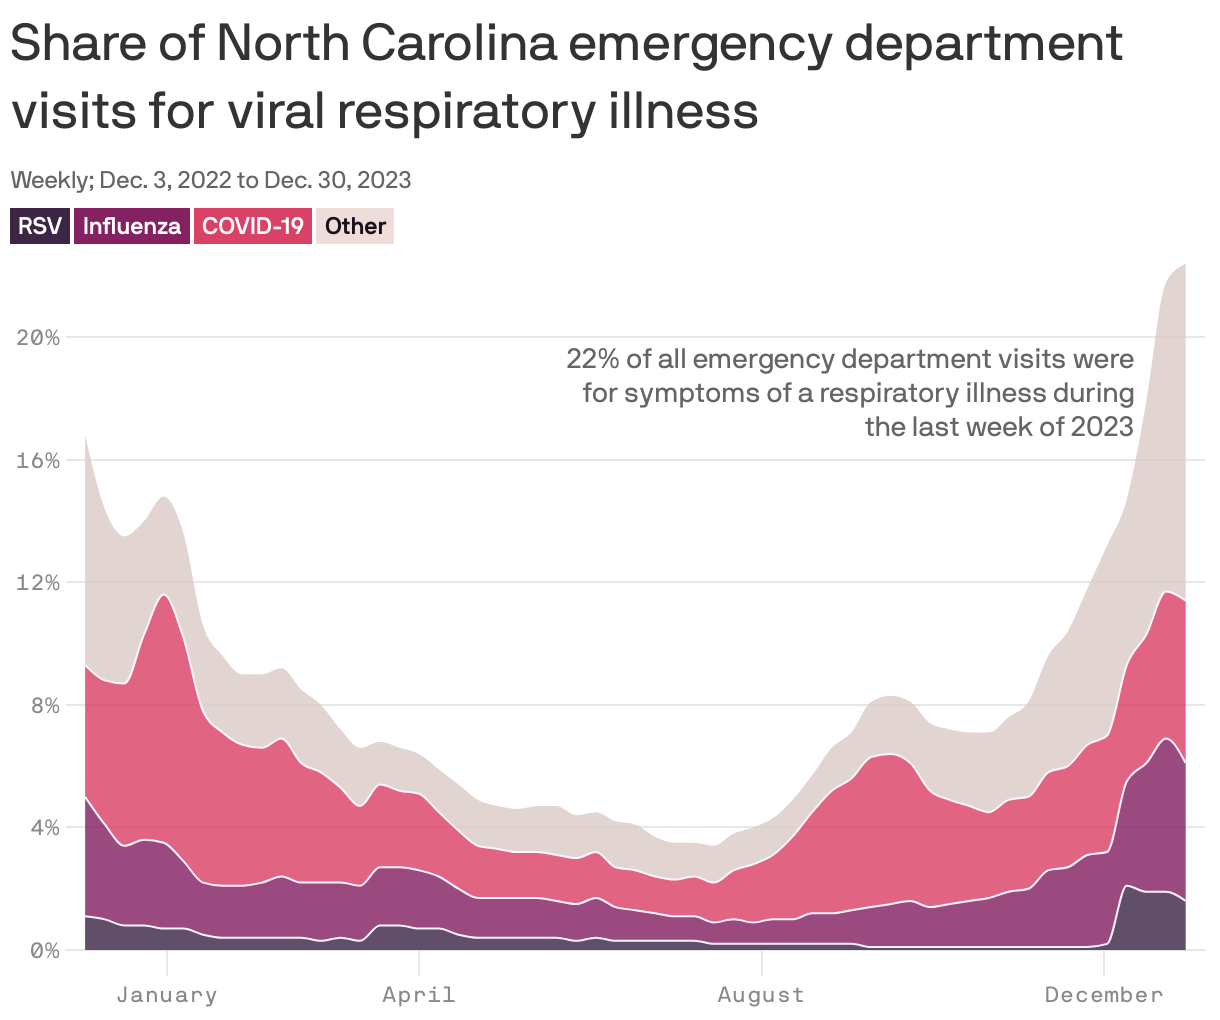 Share of North Carolina emergency department visits for viral respiratory illness